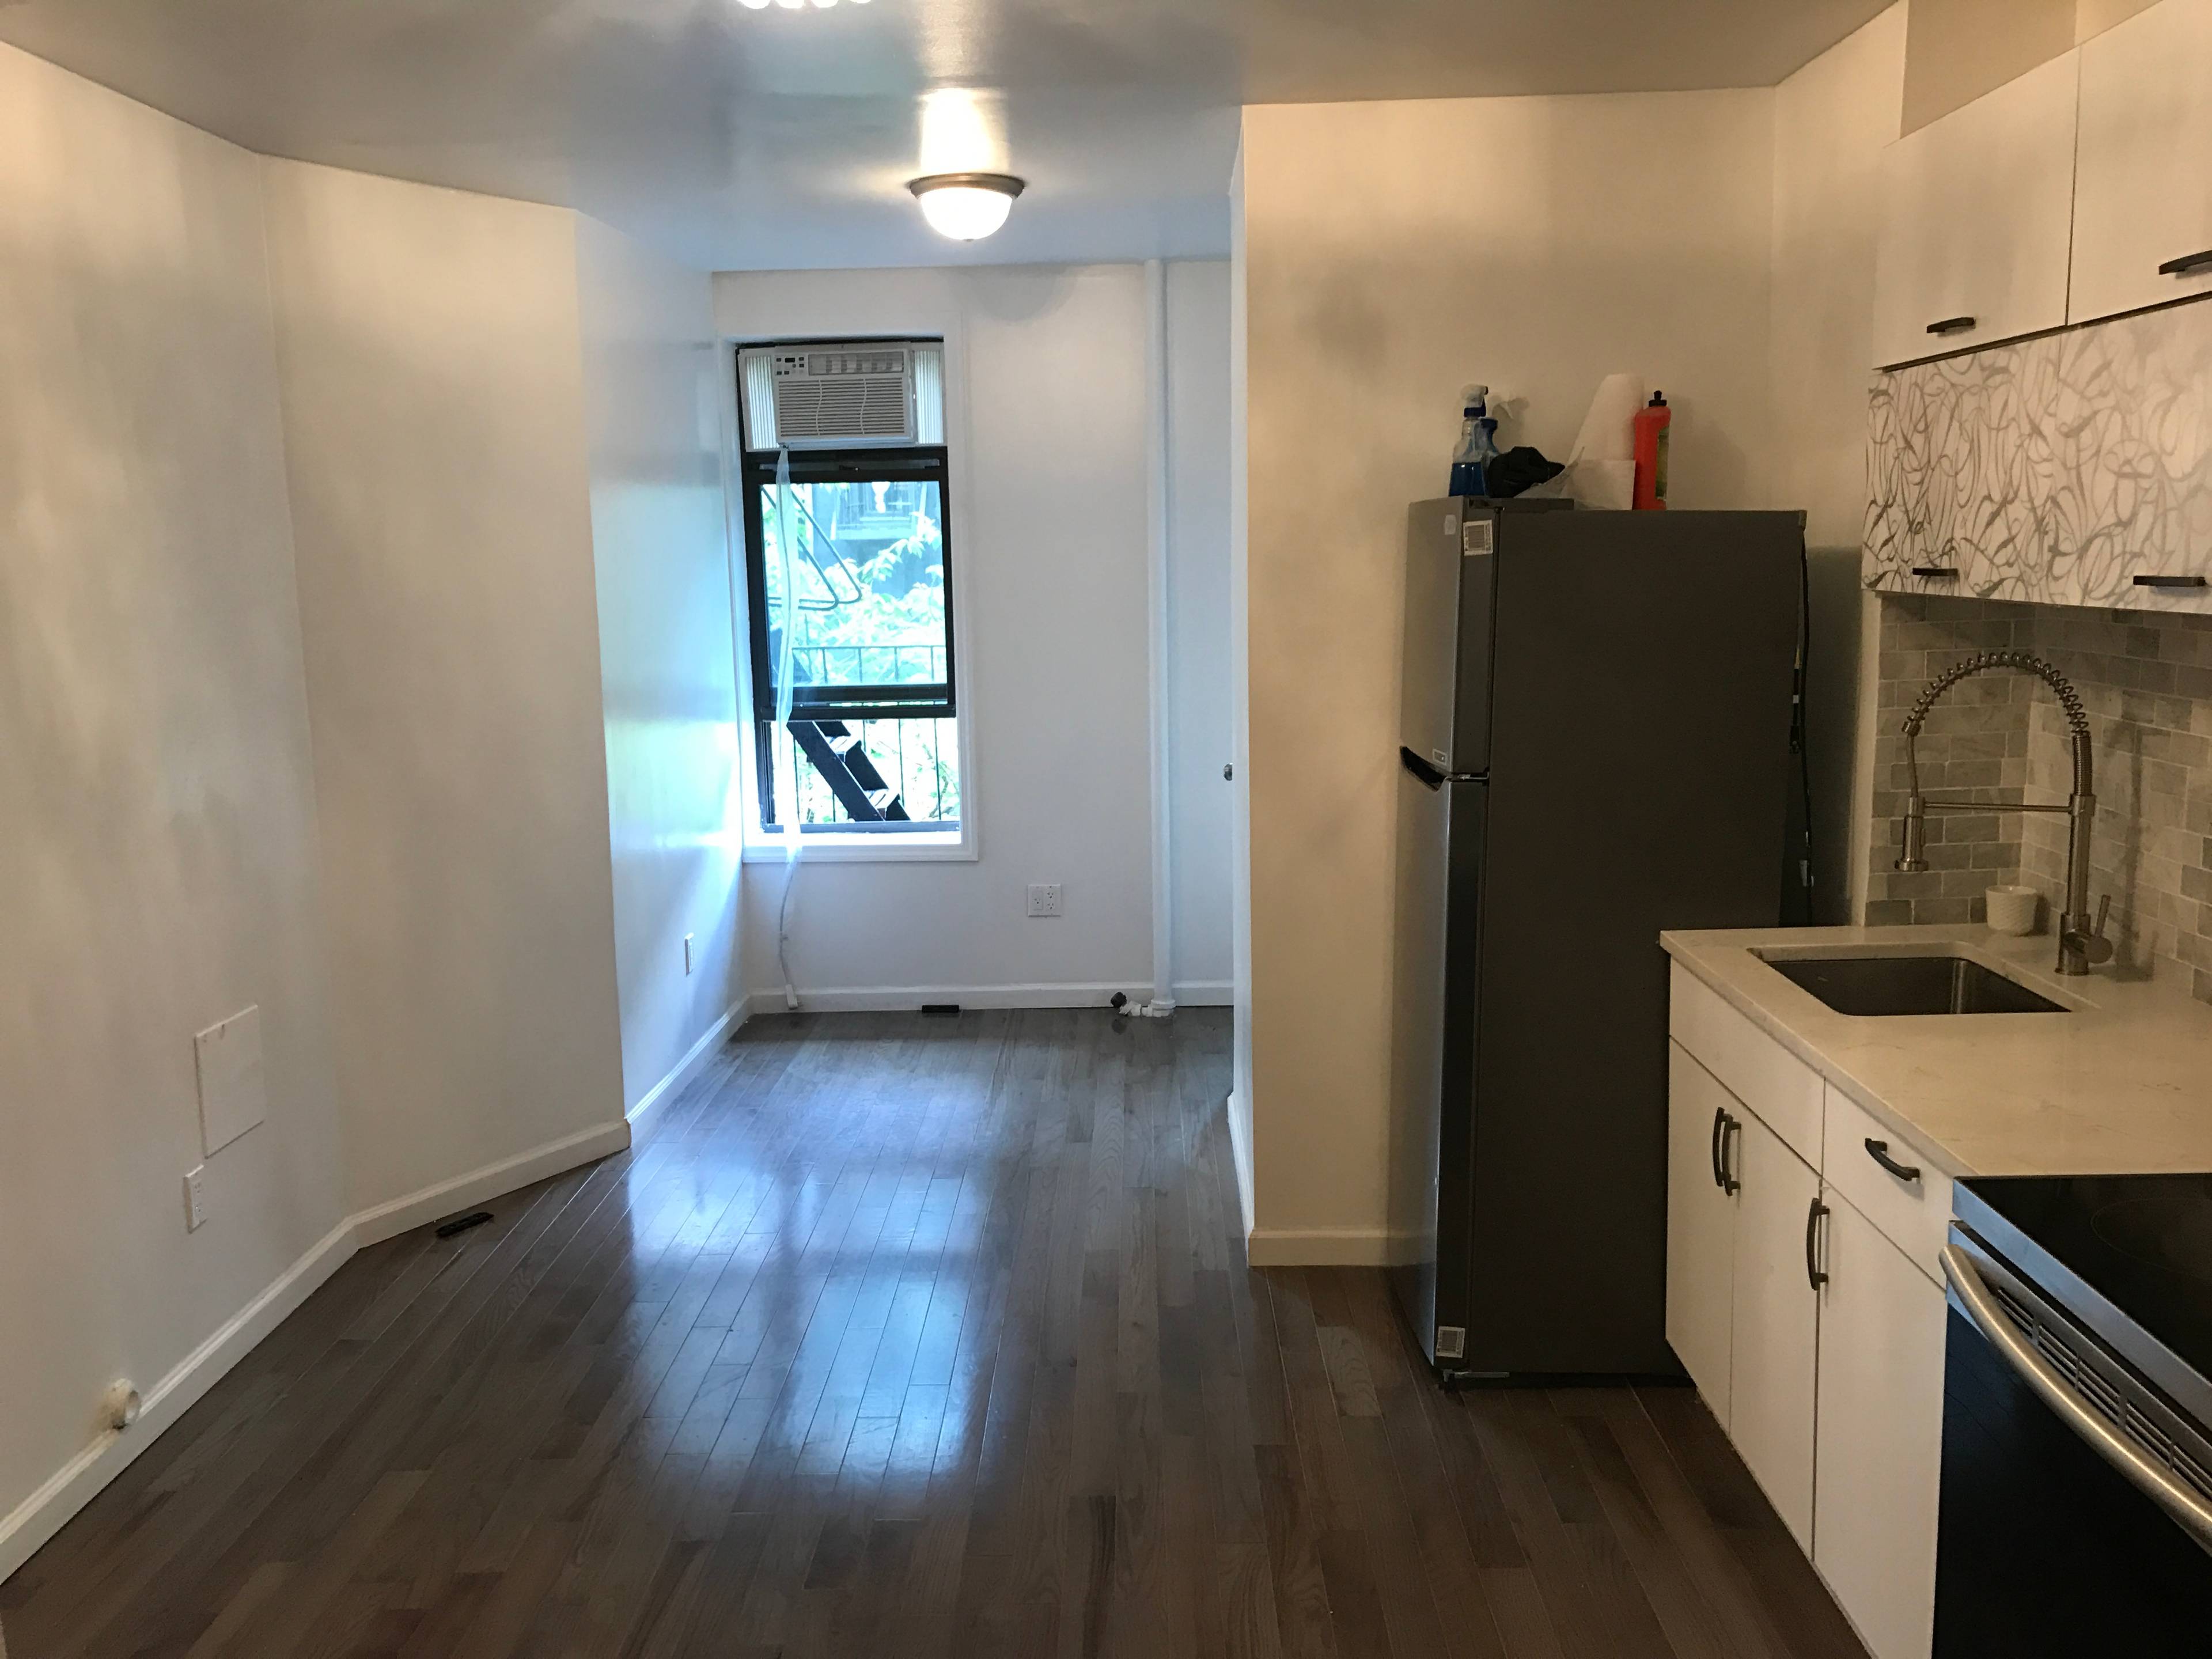 East Village: Gut Renovated Junior 1 BR with All Utilities Included + Cable + Internet + WiFi